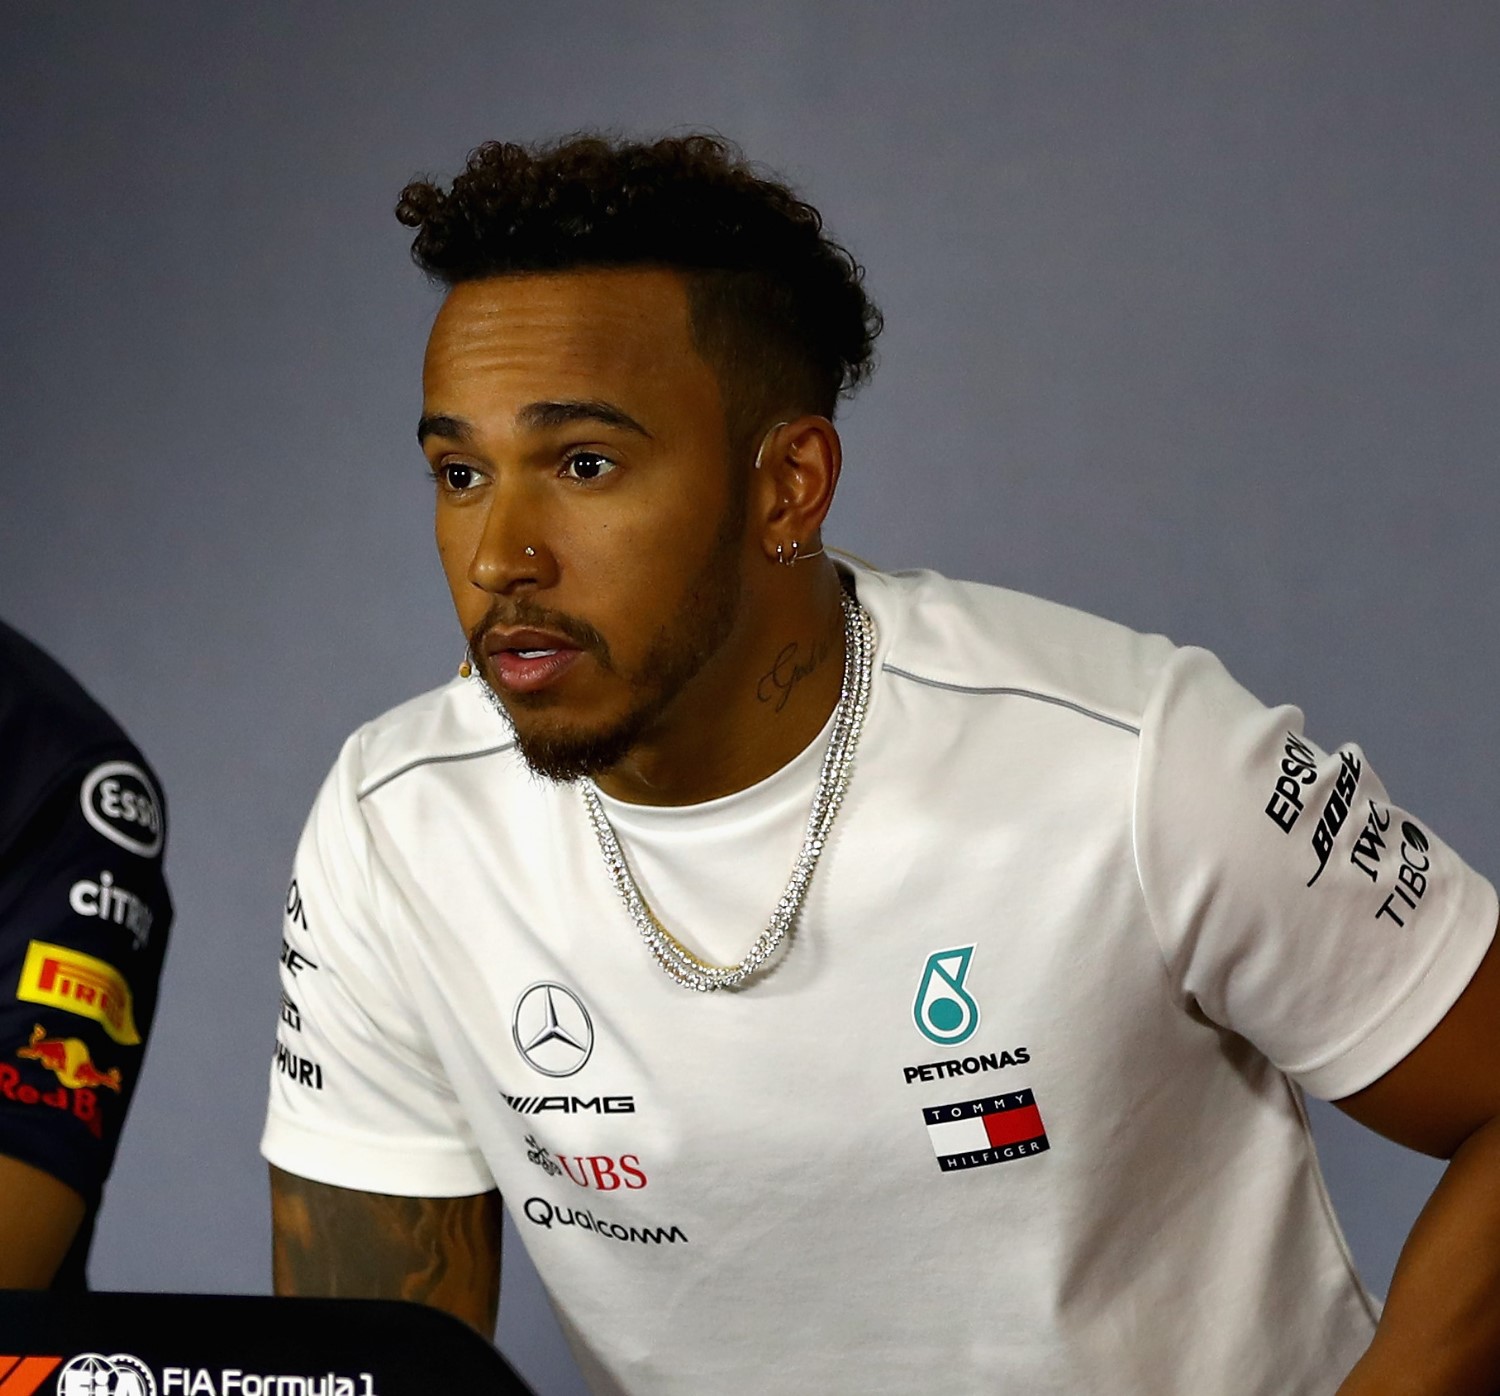 Of course Hamilton will re-sign with Mercedes. He would guaranteed another 3 to 5 consecutive titles 